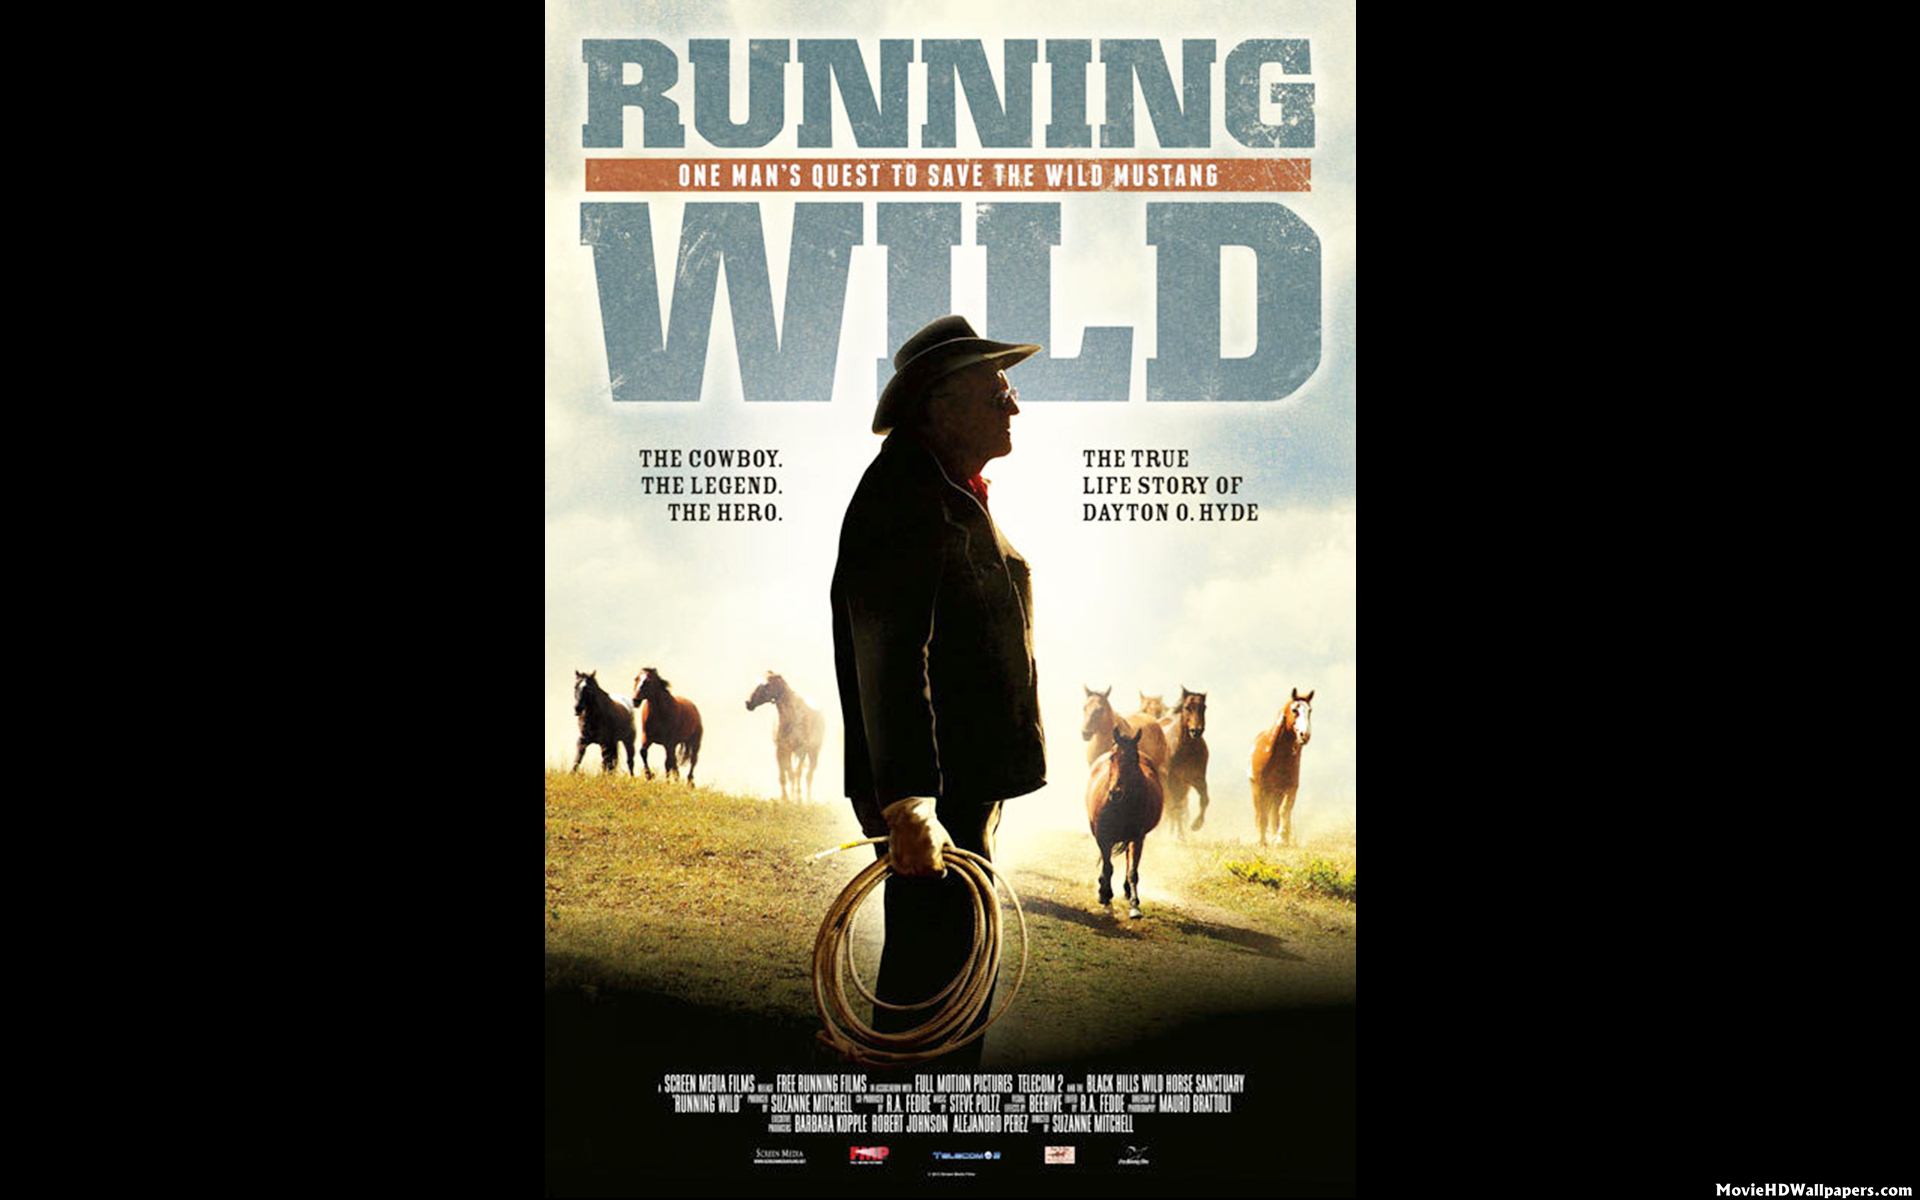 Running Wild The Life of Dayton O. Hyde (2013) Poster